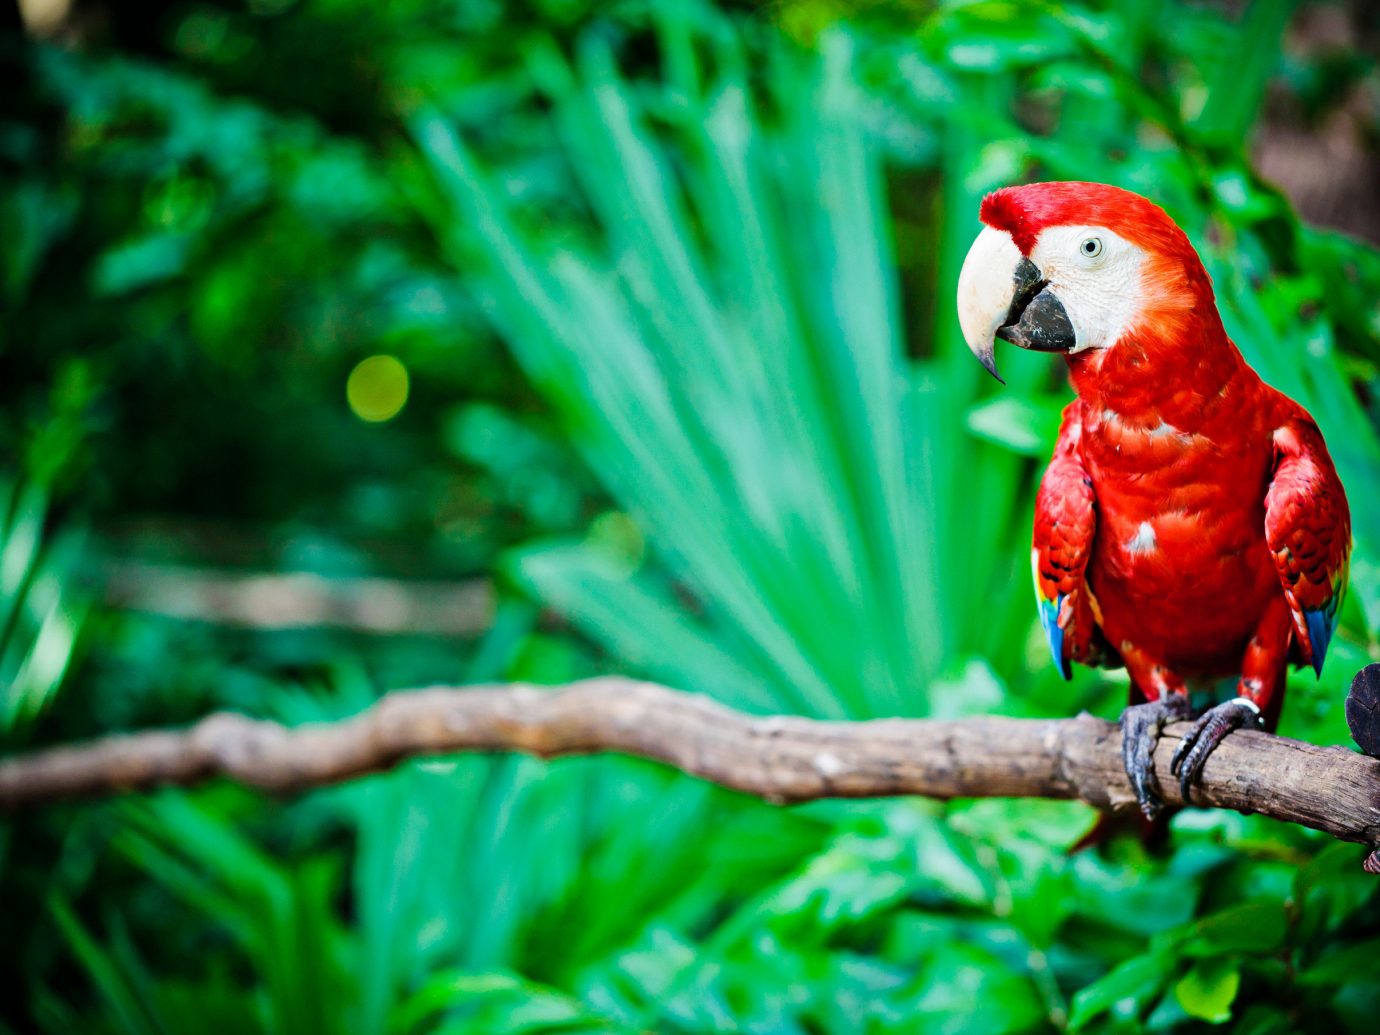 Hotels tree outdoor sitting parrot animal Bird Nature green beak vertebrate perched branch macaw fauna red Wildlife parakeet colorful Jungle lorikeet colored